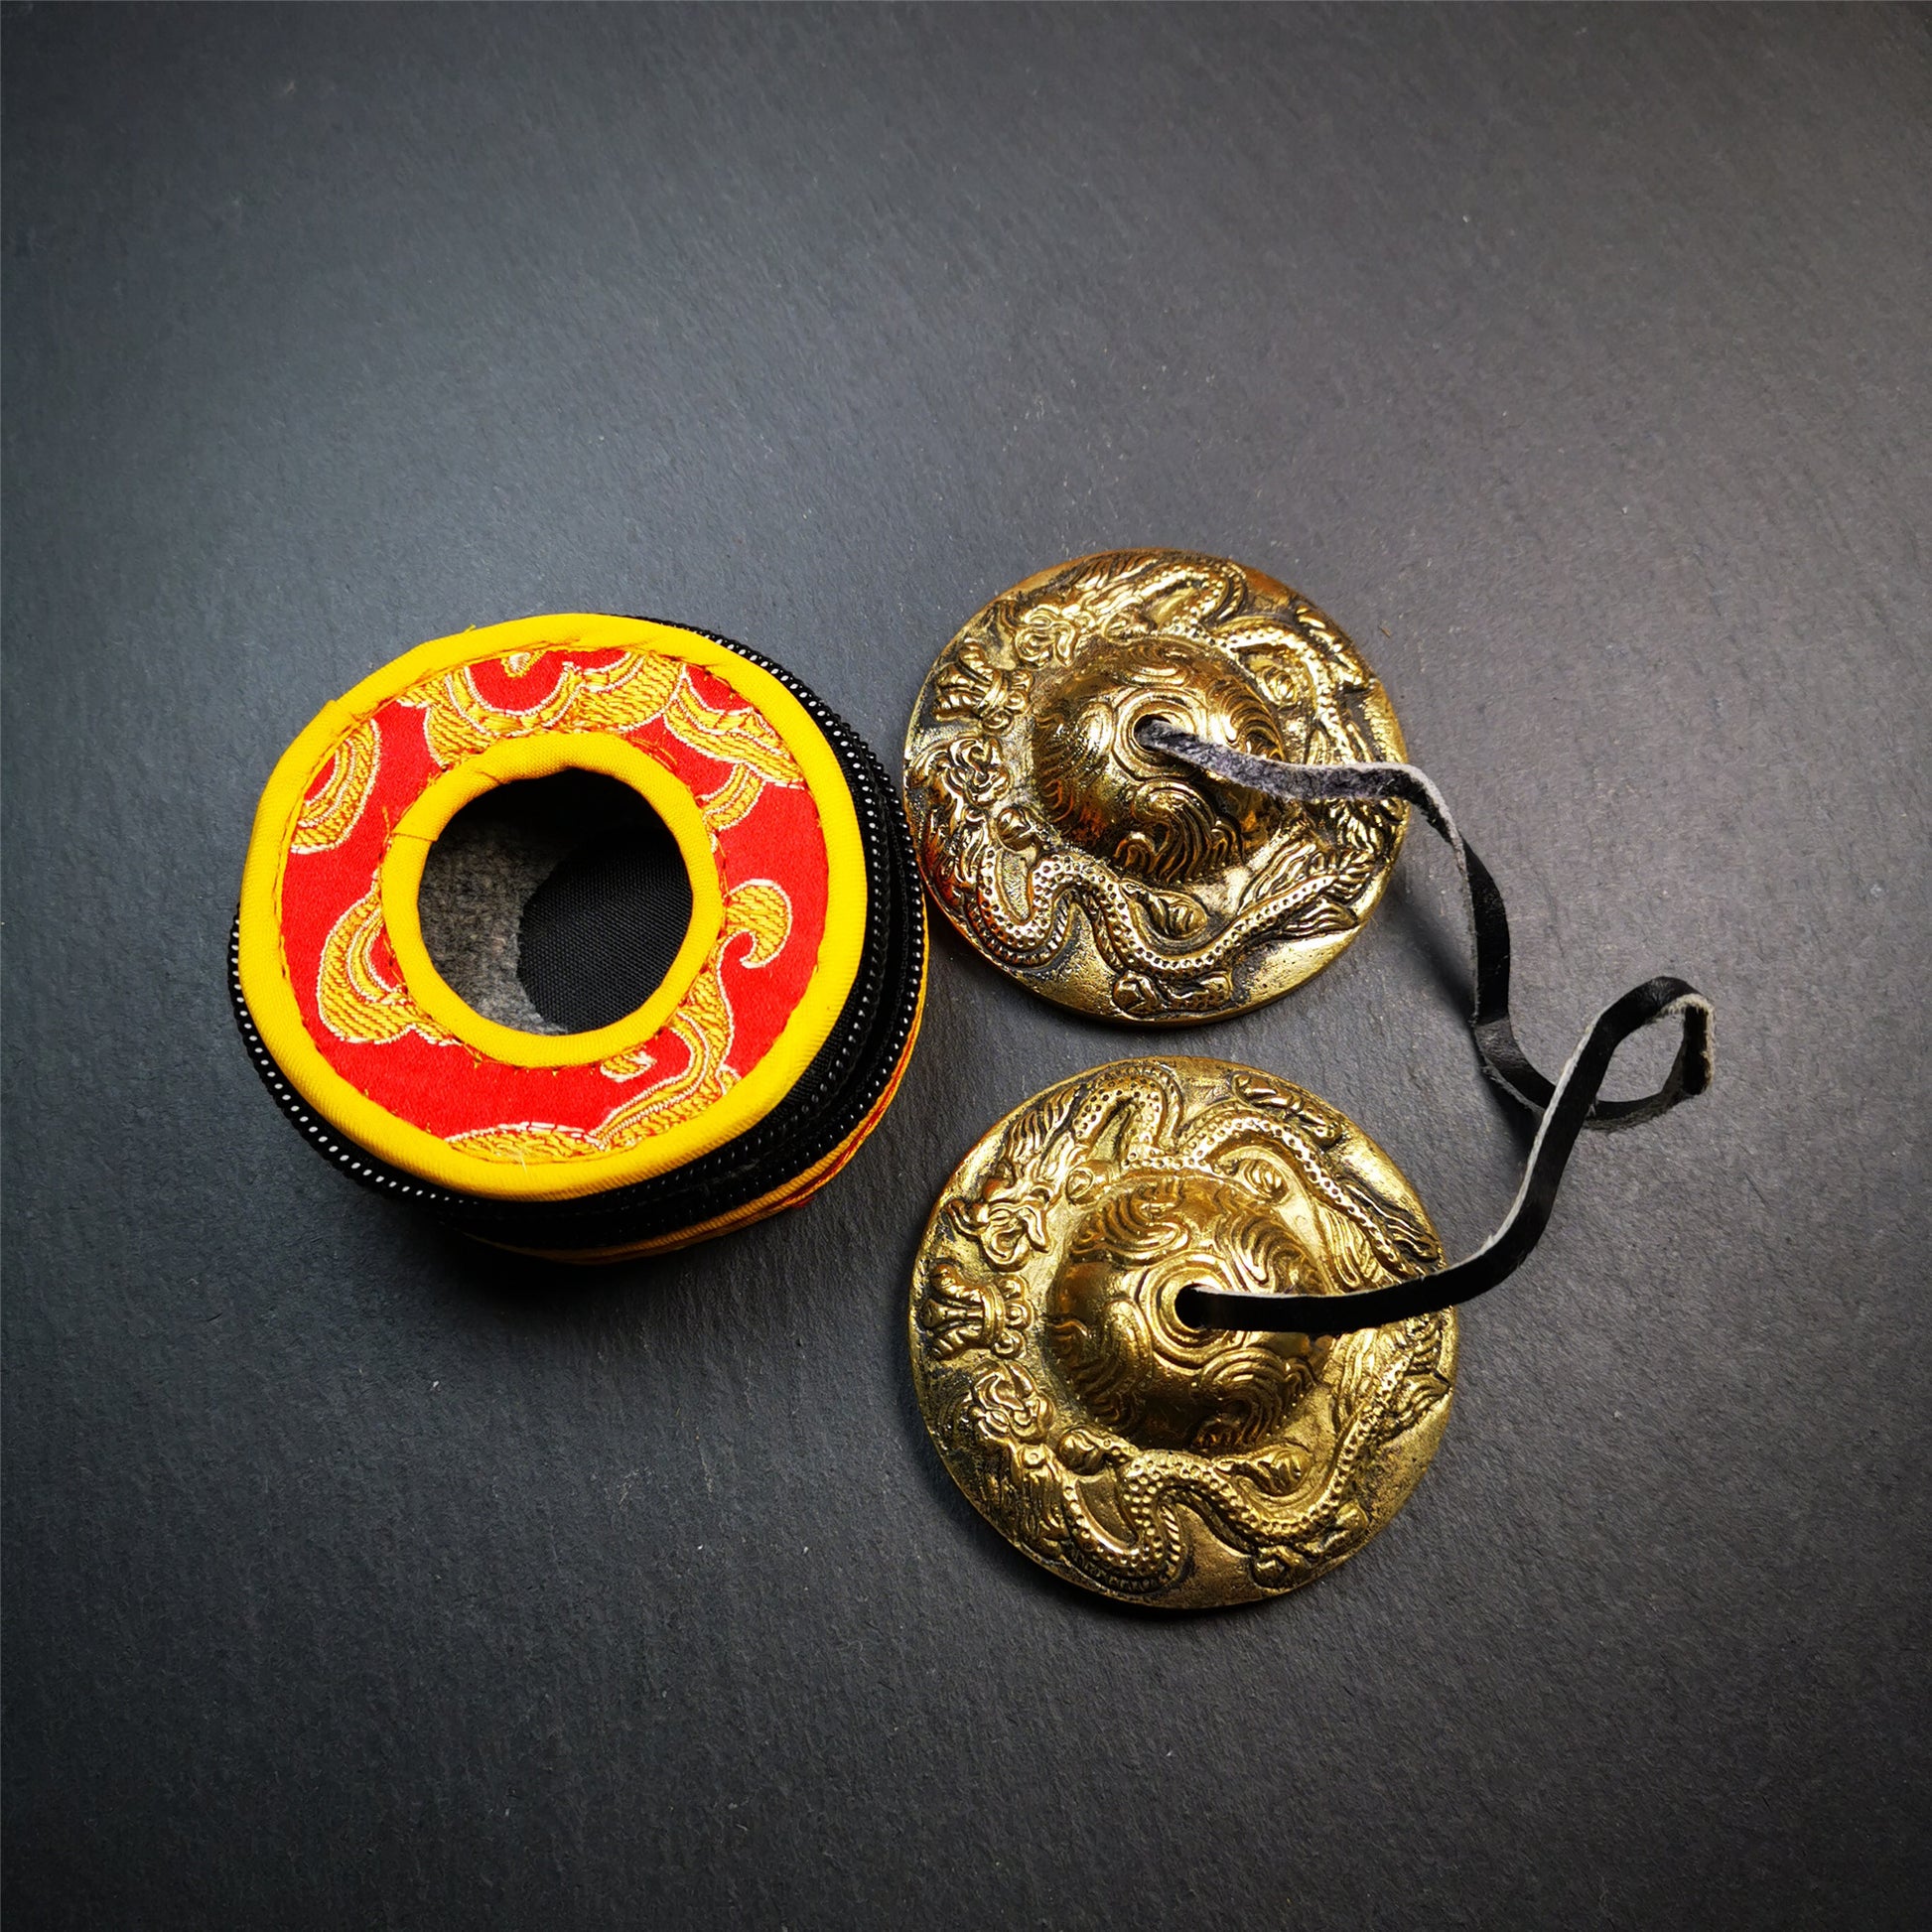 This tingsha bell set was handmade in Nepal,using traditional techniques and materials. It was made of brass,carved 2 dragons pattern,6.5cm diameter,with pure, clear and resonant,good for meditation. Come with tingsha case.